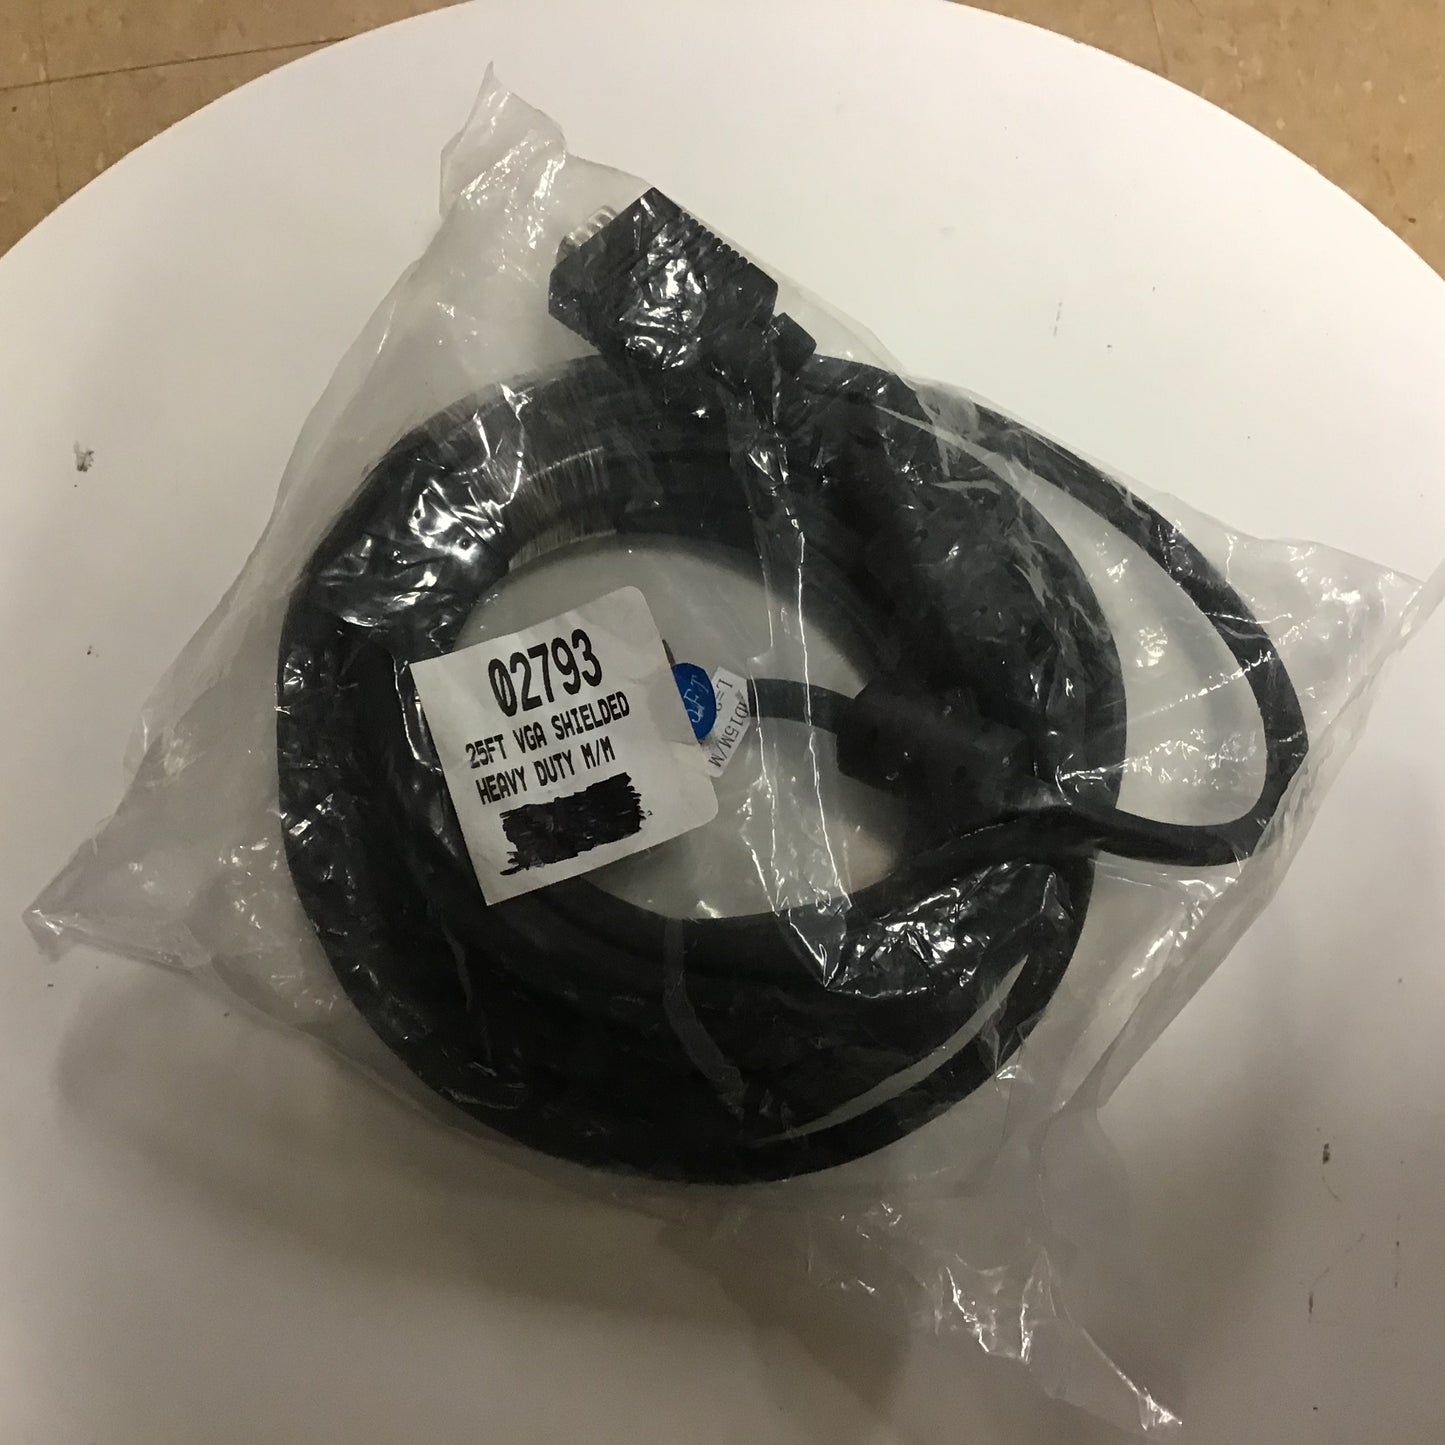 VGA Shielded Cable 25 FT [New, Sealed]